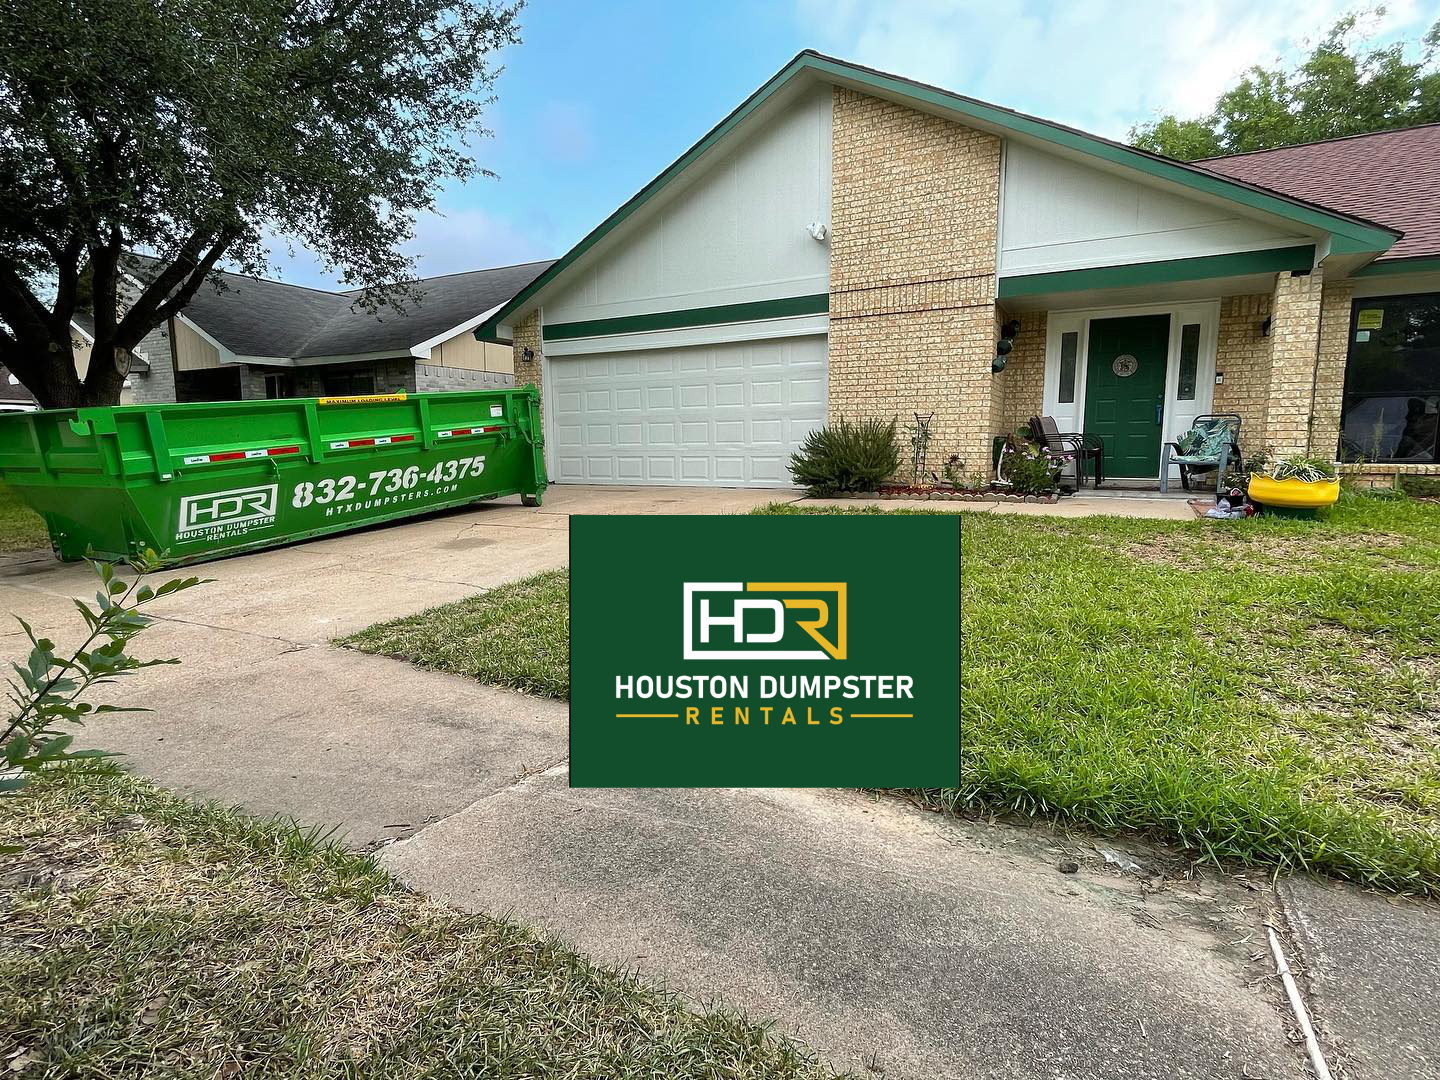 Residential Dumpster Rental HTX Dumpsters Pearland TX